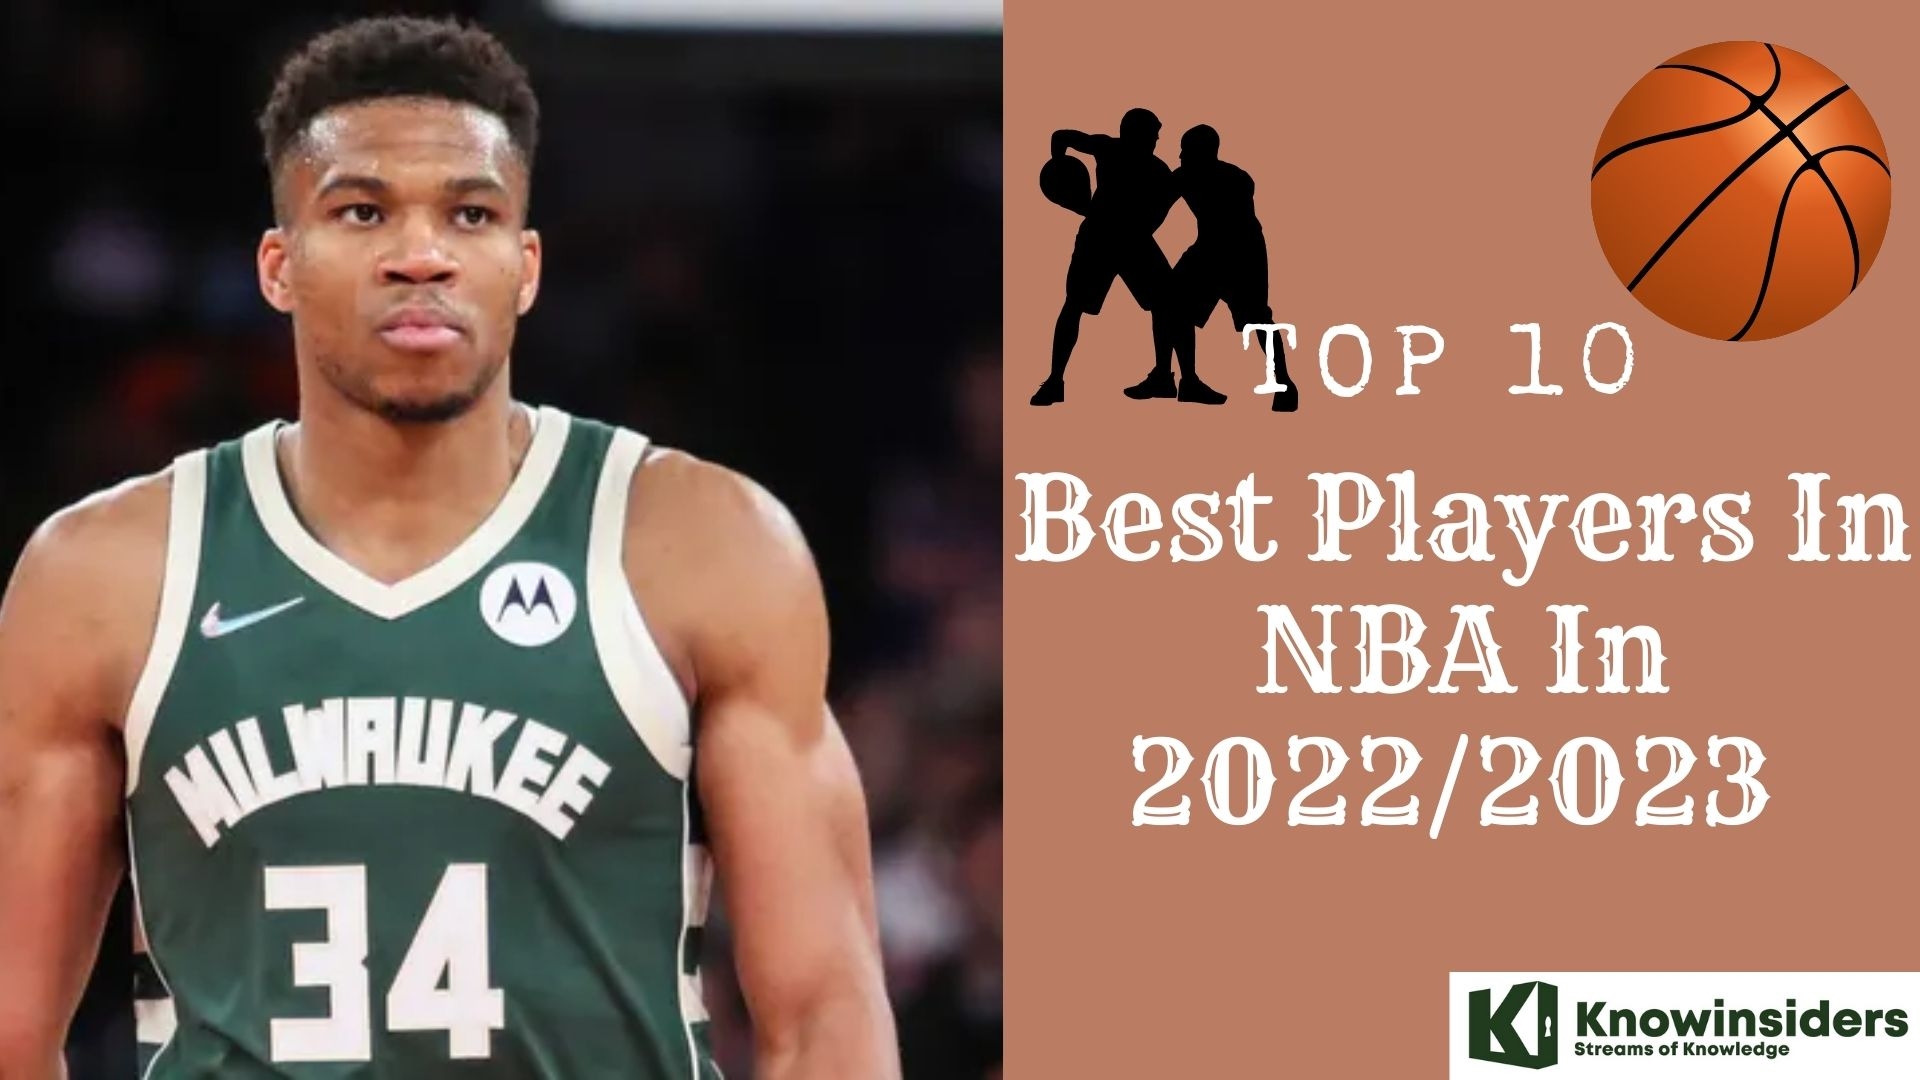 Top 10 Best Players in NBA In 2022/2023 